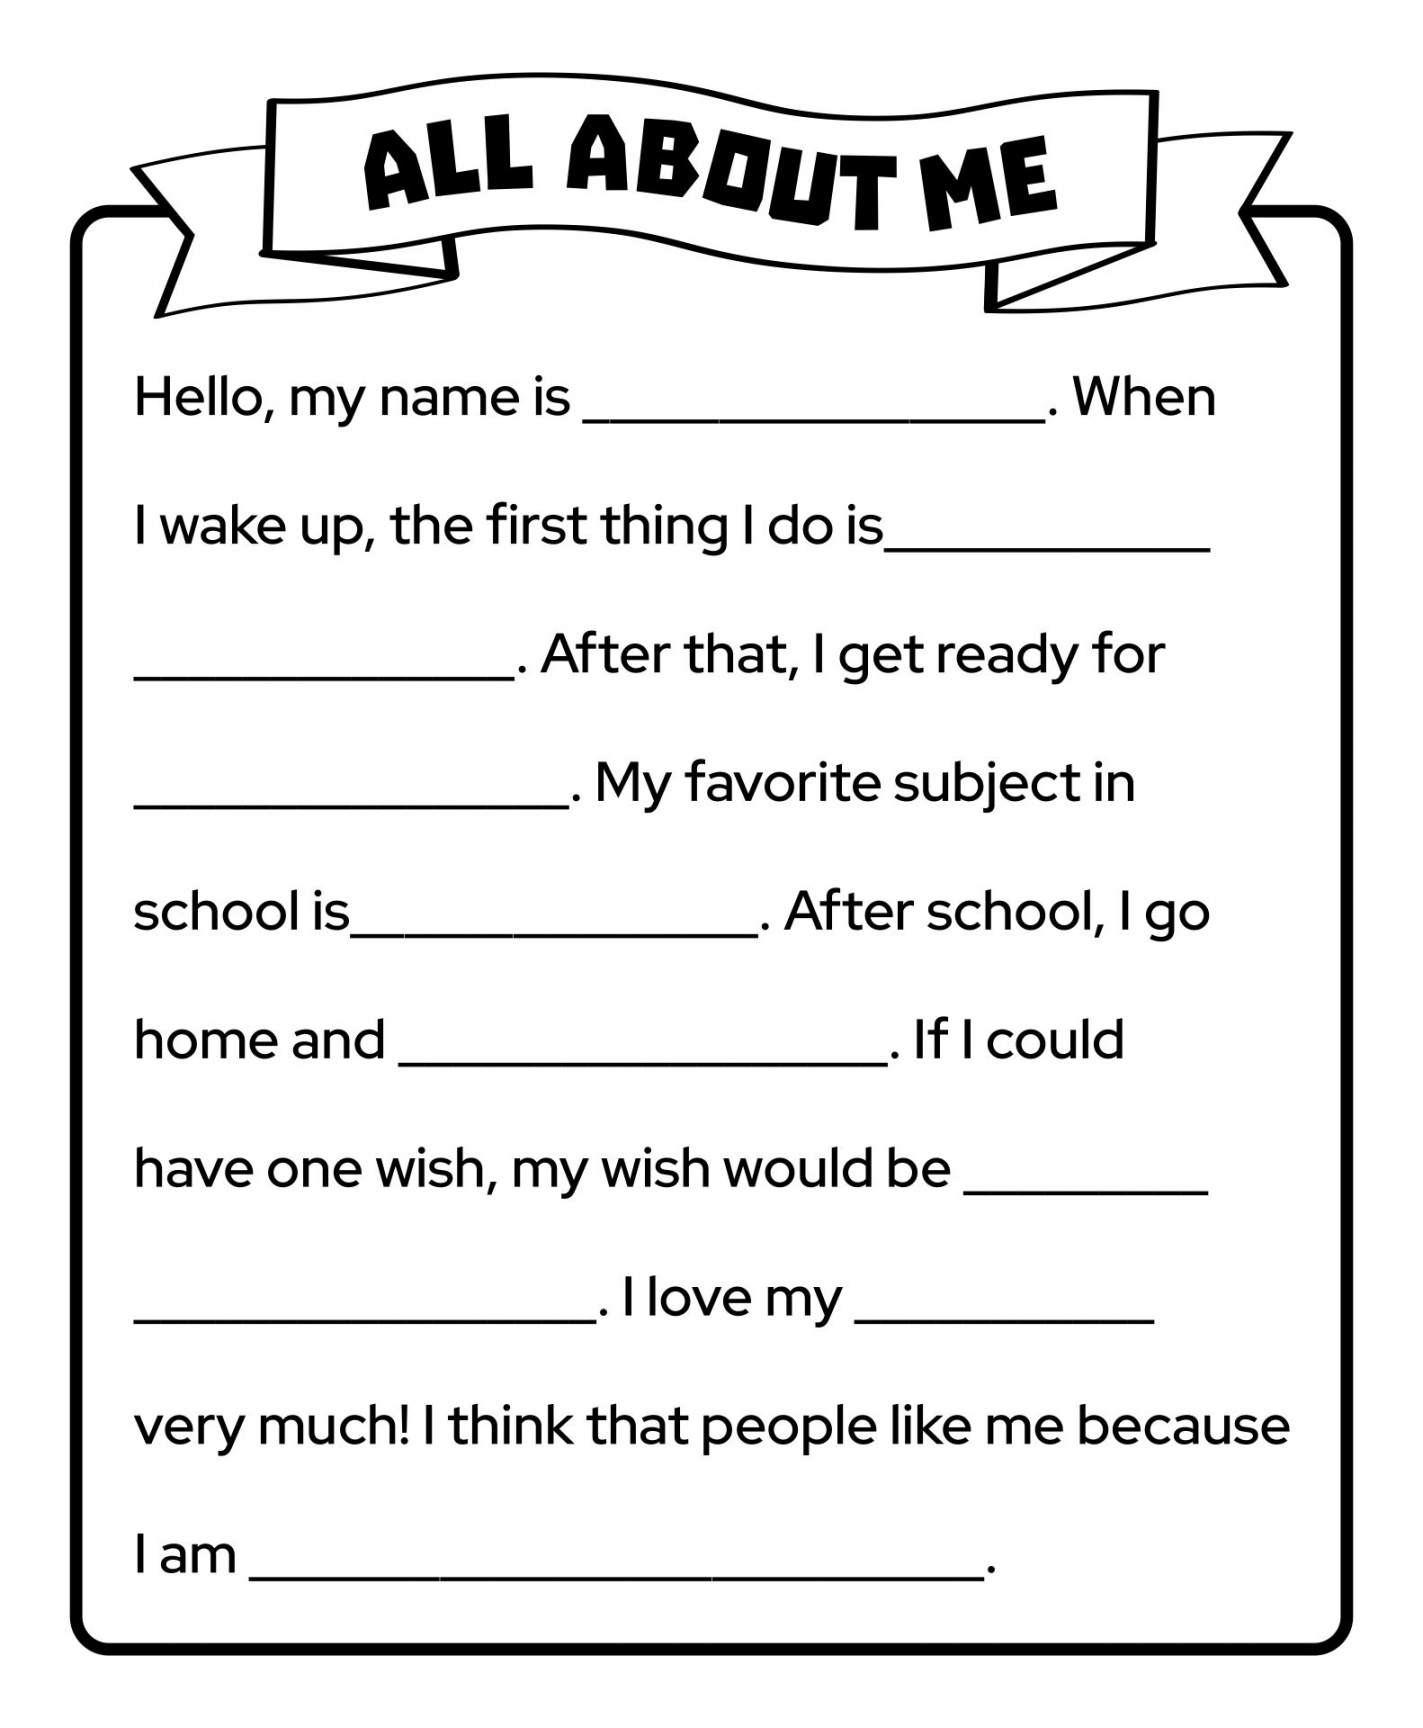 Best Printable Worksheets About.me Adult - printablee - Free Printable All About Me Worksheet For Adults